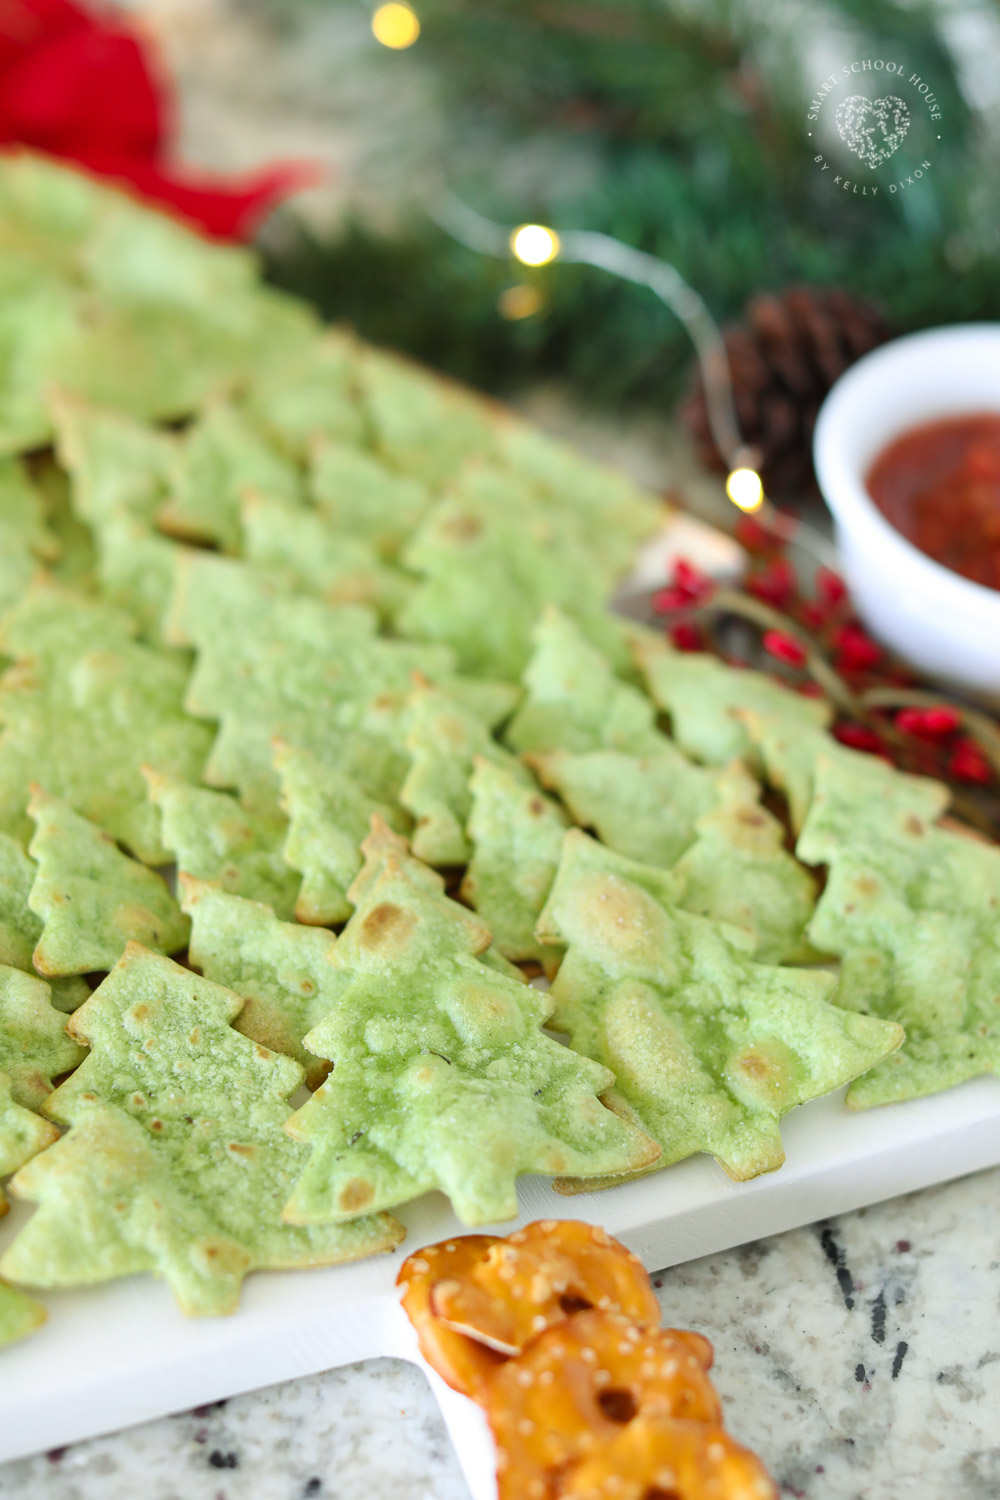 Everything about these Christmas Tree Tortilla Chips is fun! They are not only adorable, the crunchy little trees dress up any dish or platter for the holidays.